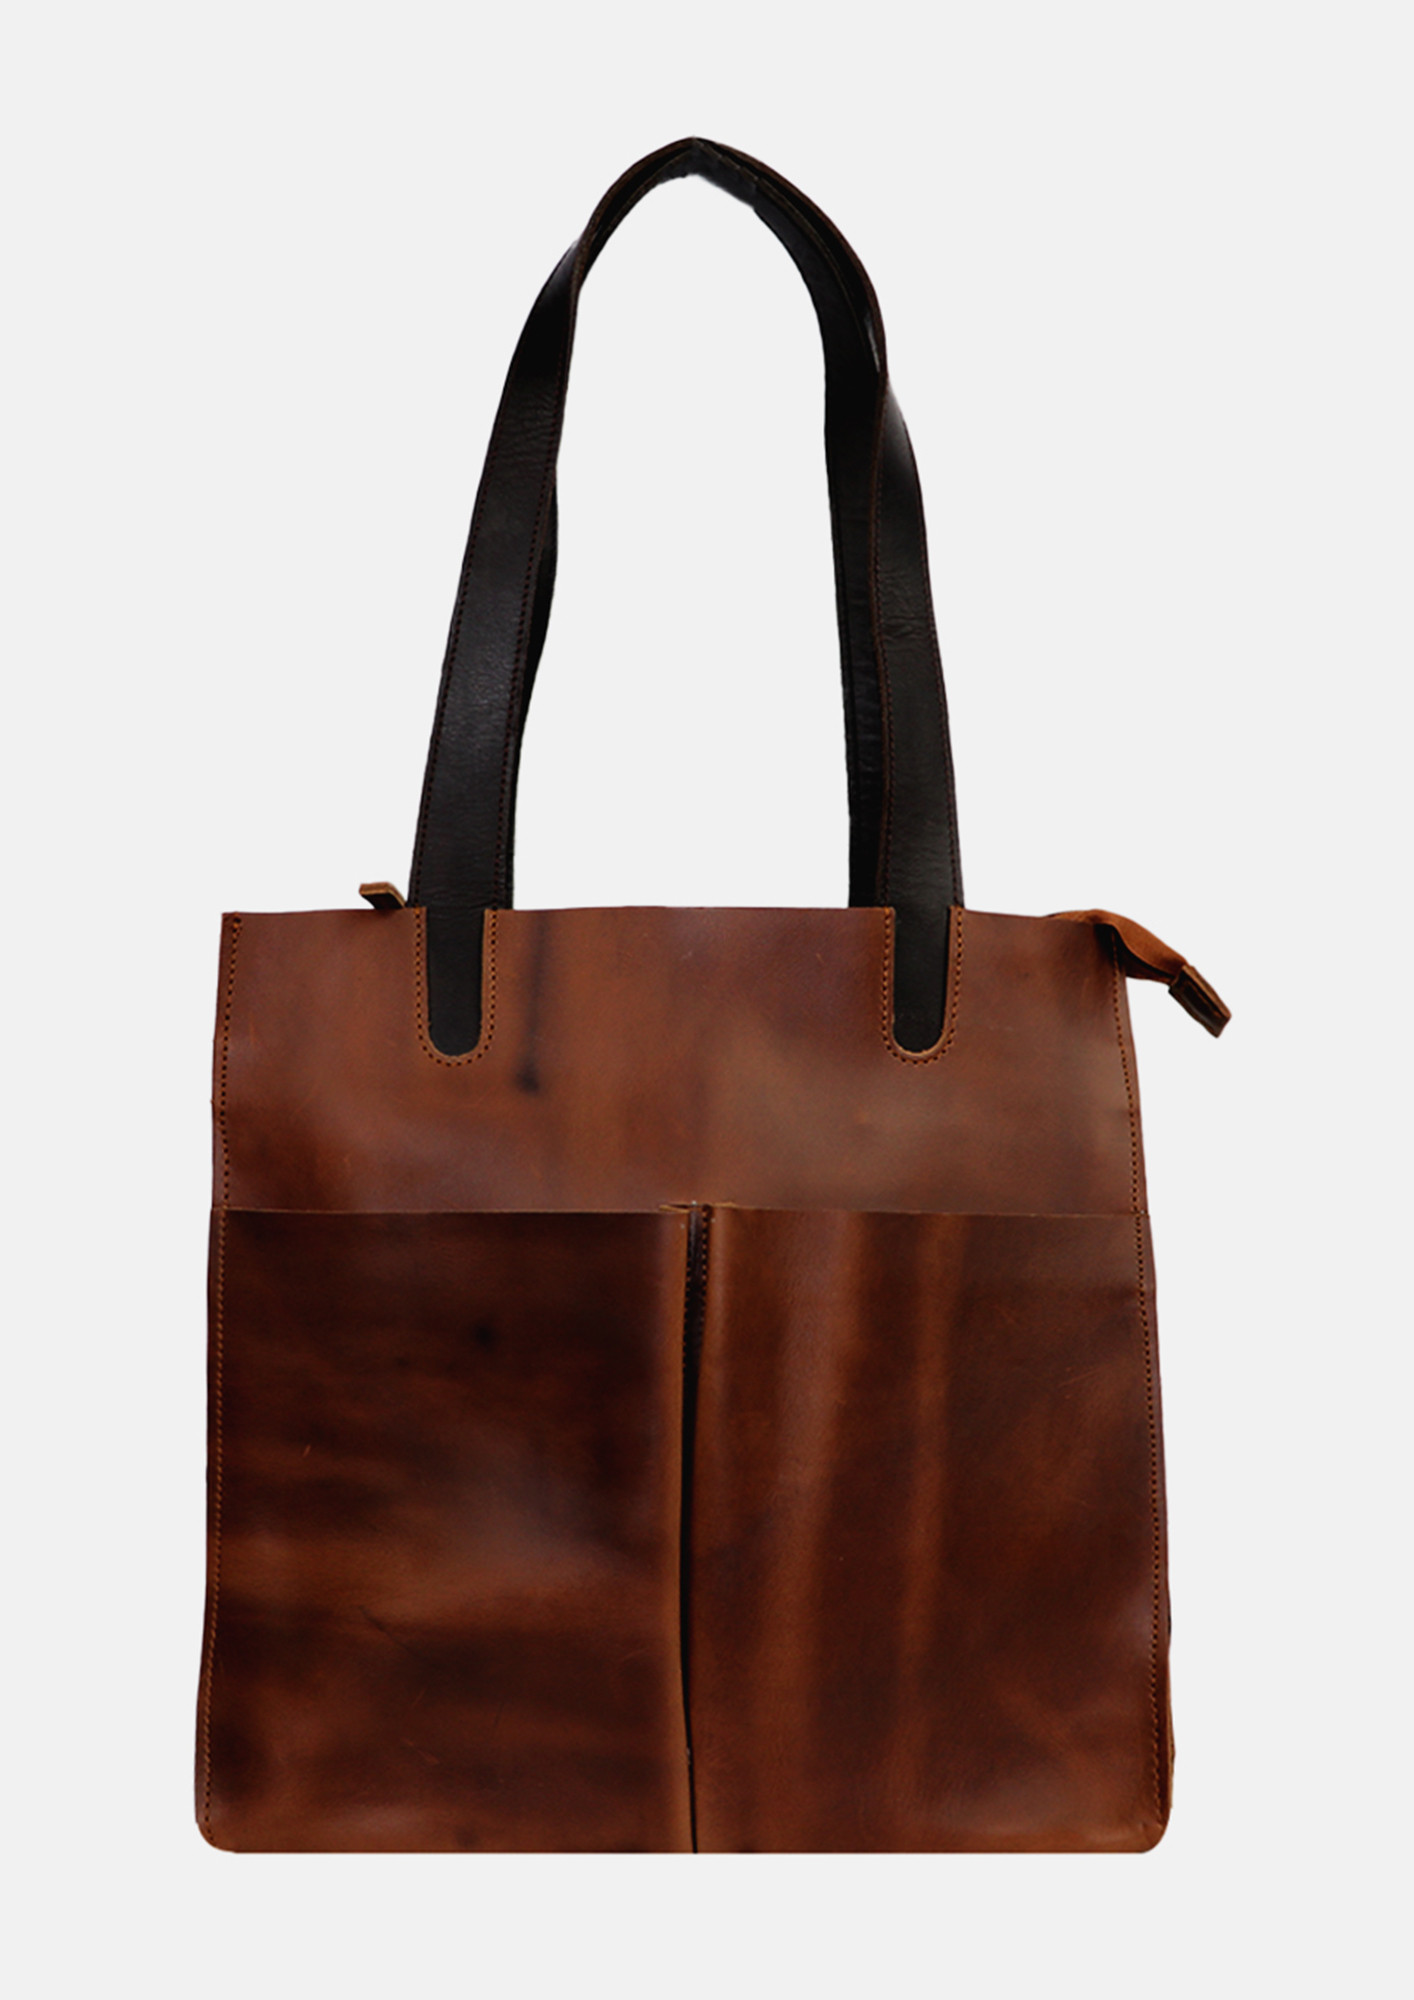 Tote Bag With Leather Shoulder Straps - Brown